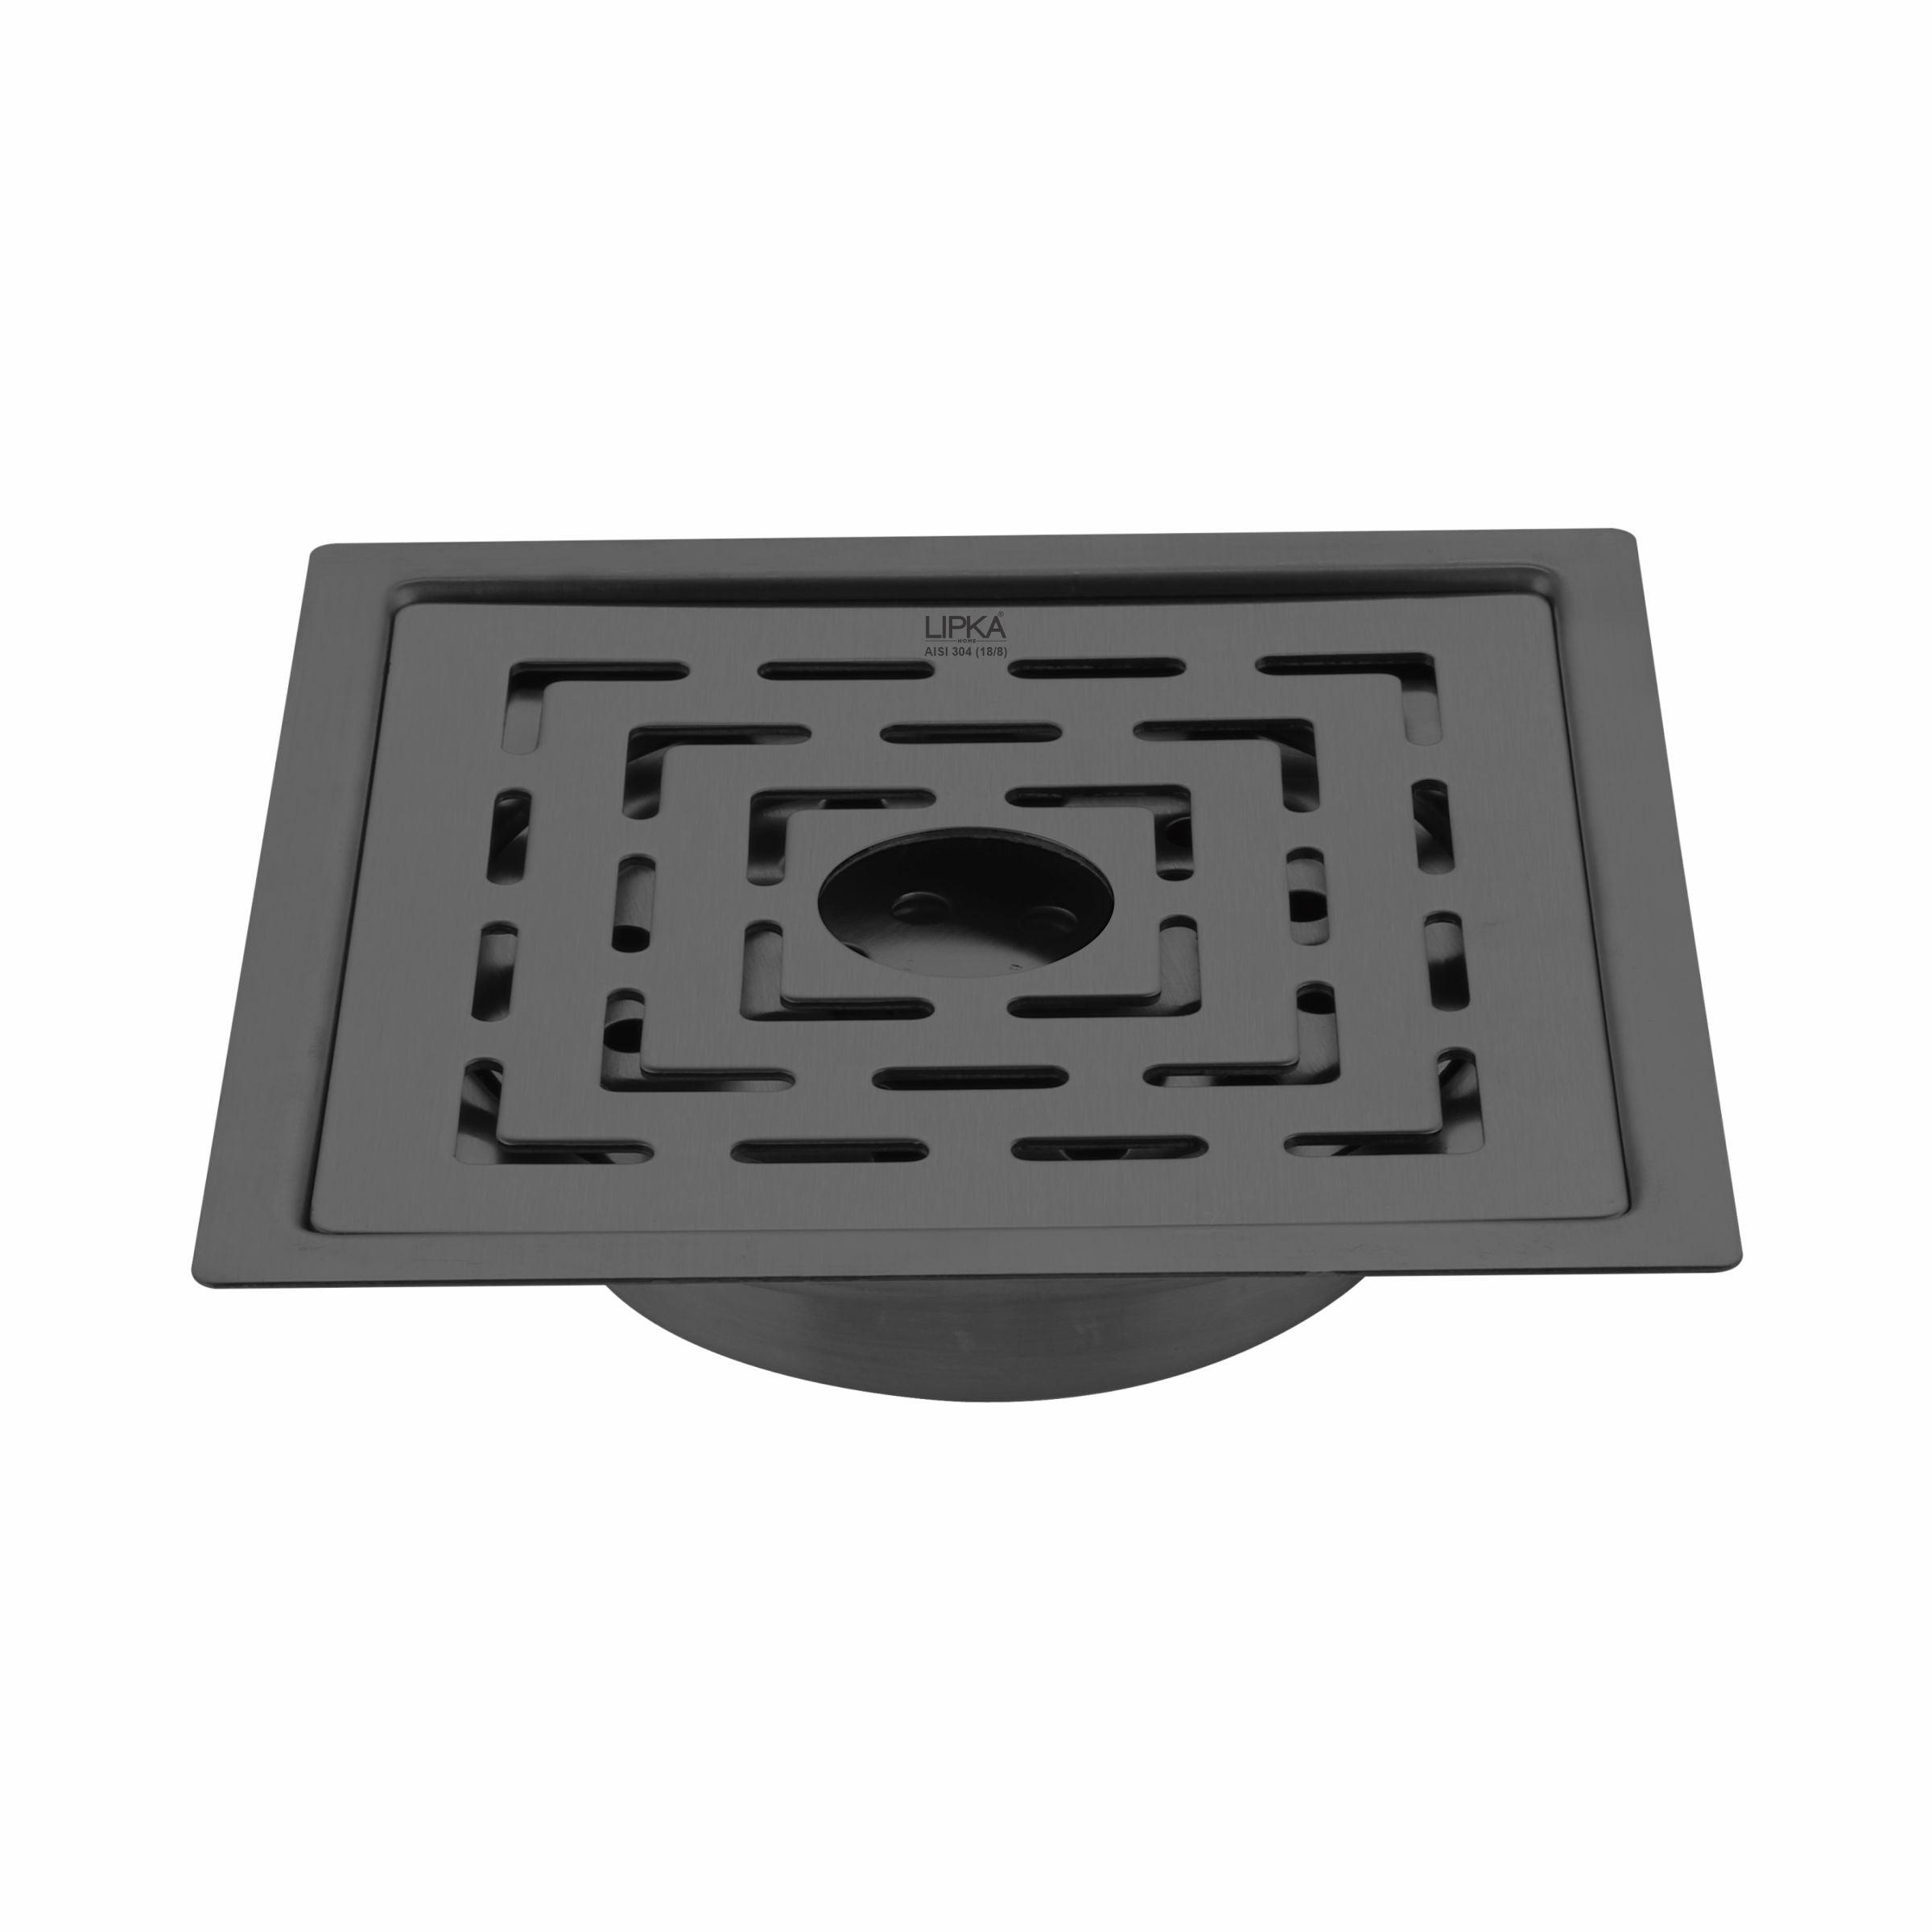 Orange Exclusive Square Flat Cut Floor Drain in Black PVD Coating (6 x 6 Inches) with Hole & Cockroach Trap  